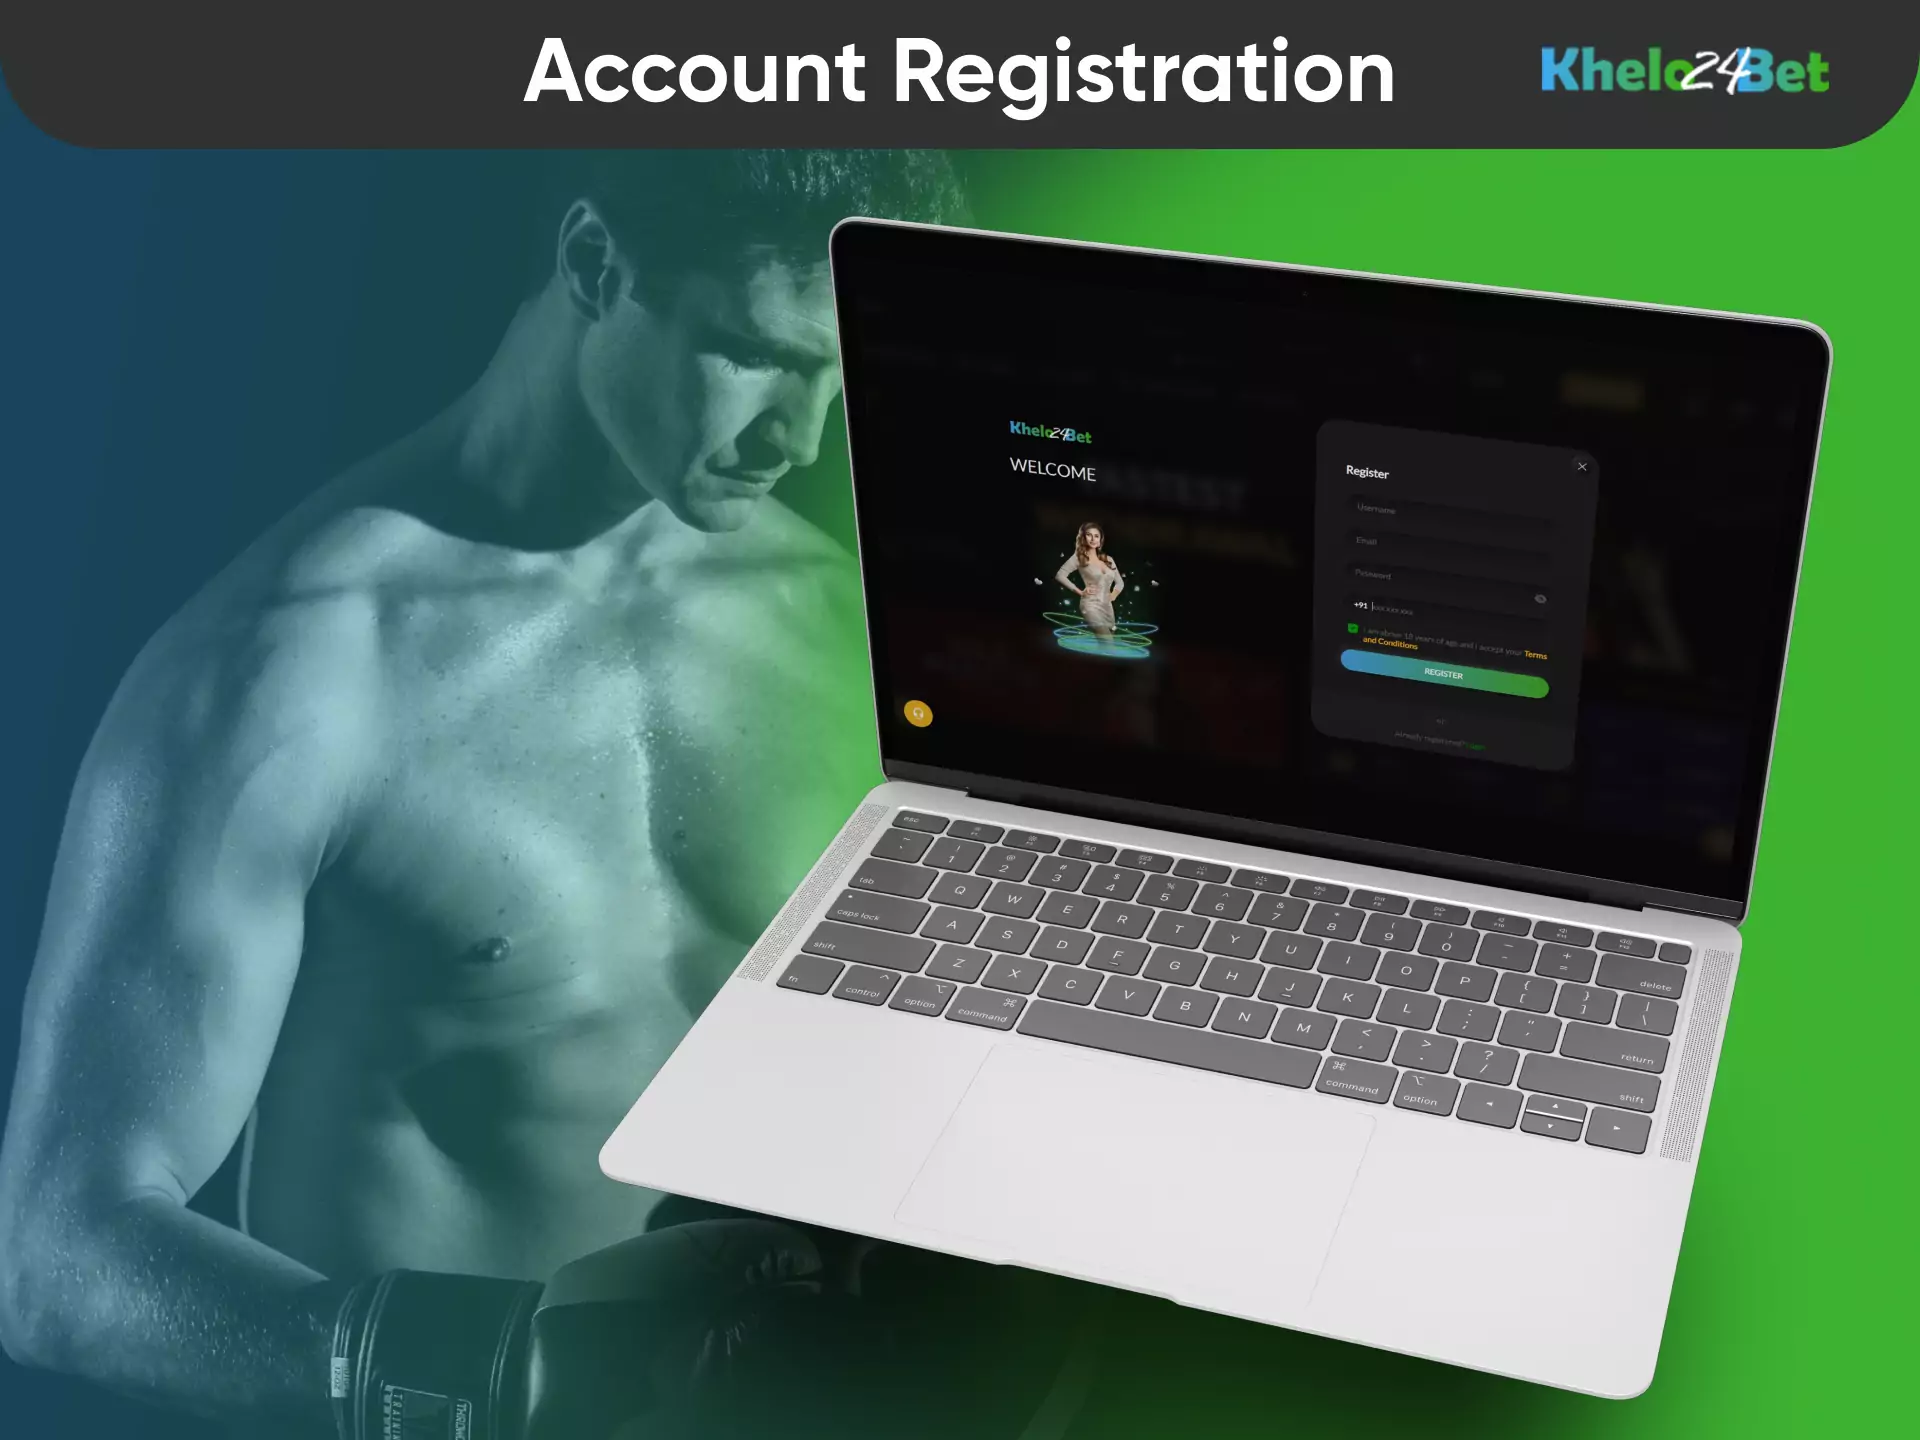 Before starting, create an account and join the Khelo24bet community.